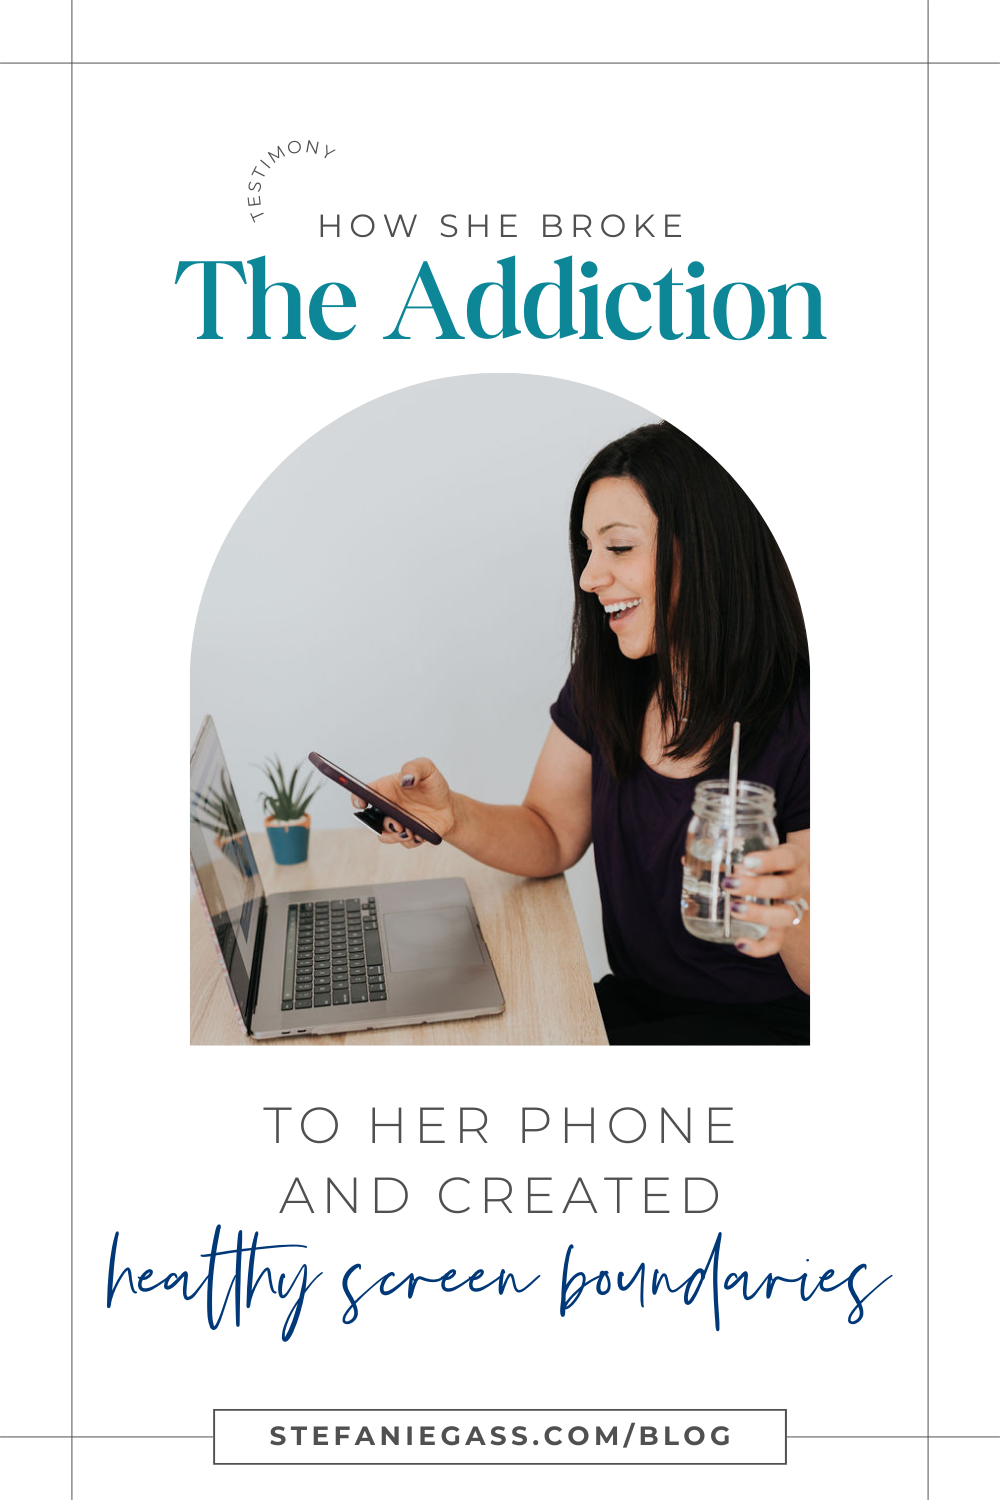 Brown haired woman on her phone, at a desk with her laptop holding a glass of water with a straw, smiling. Text says: How she broke her addiction to her phone and created healthy screen boundaries. 